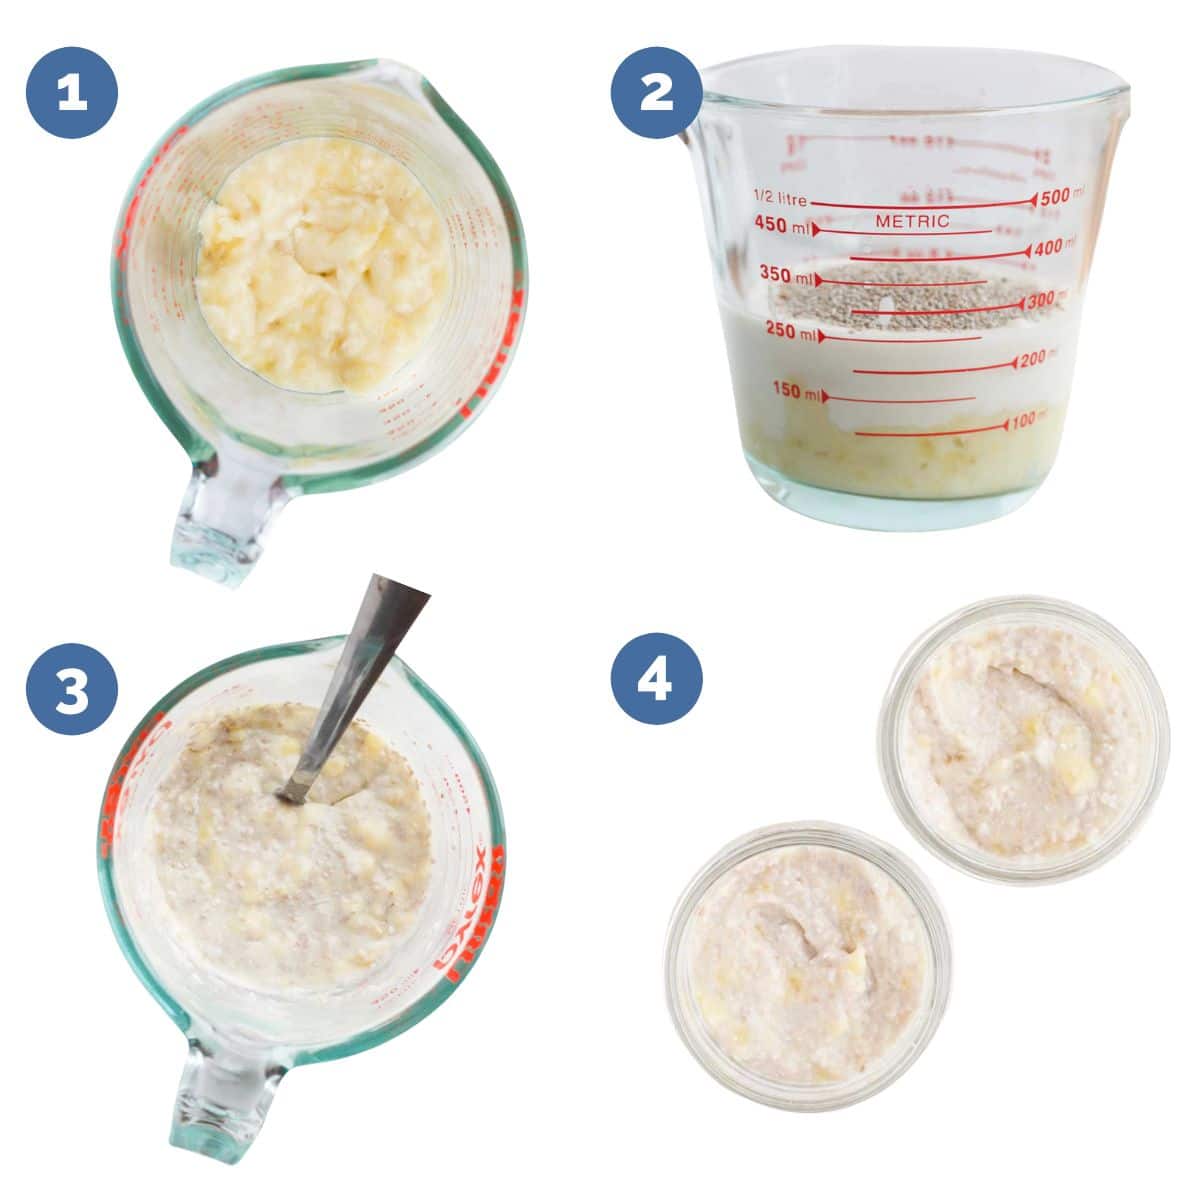 Collage of 4 Images Showing How to Make Banana Chia Pudding.